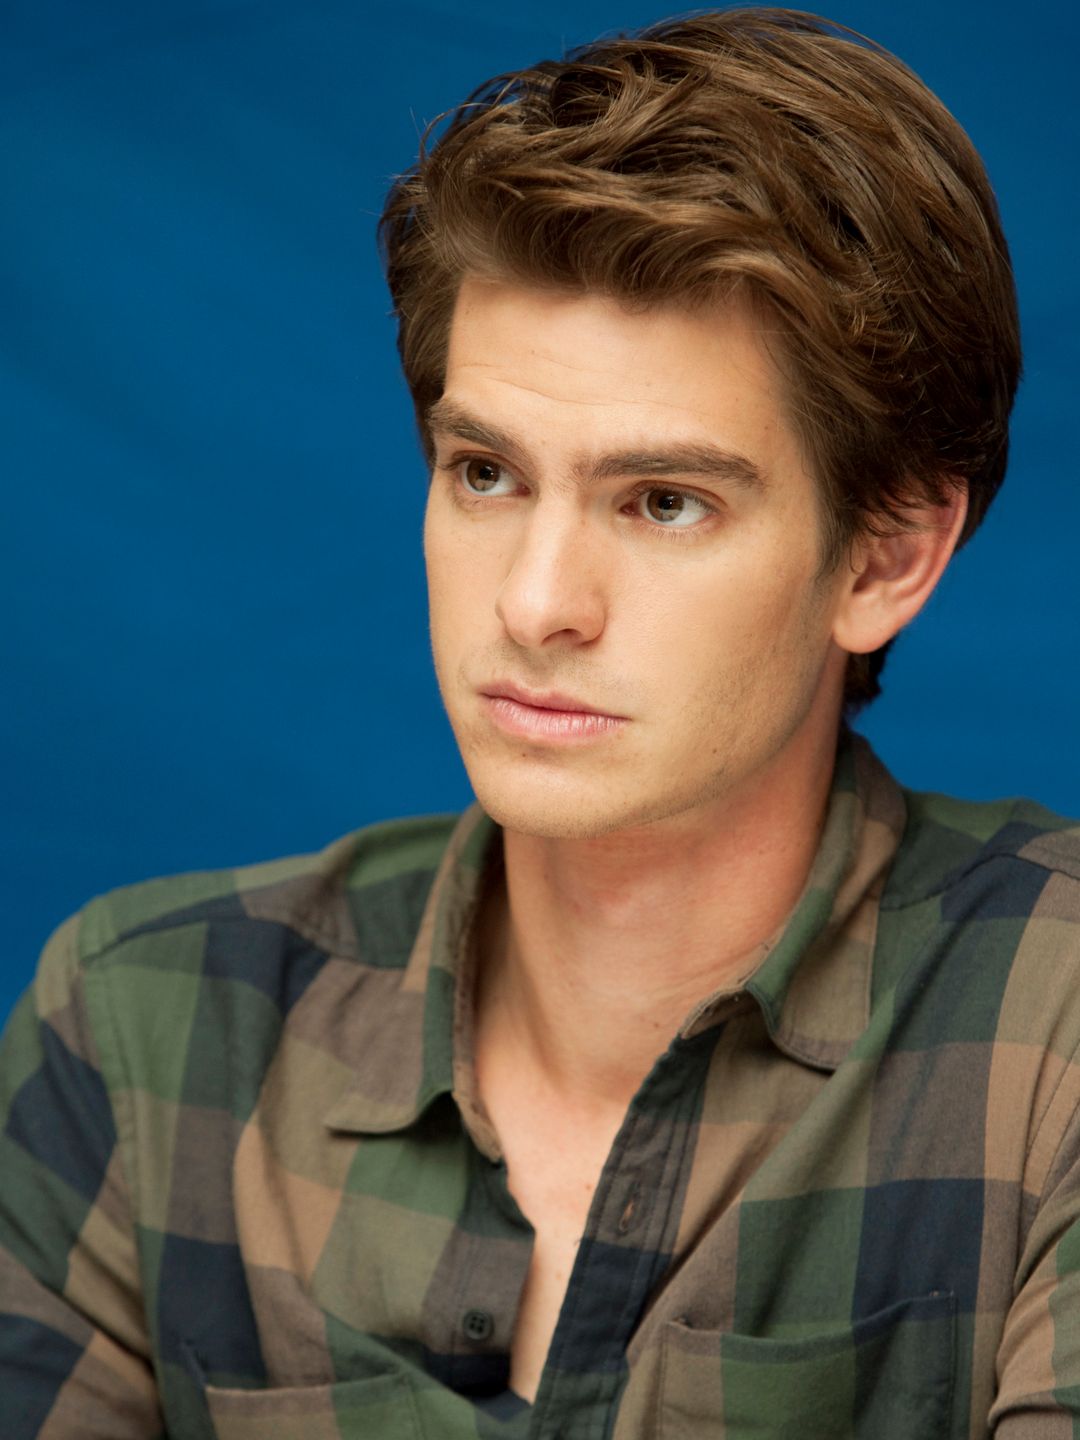 Andrew Garfield appearance